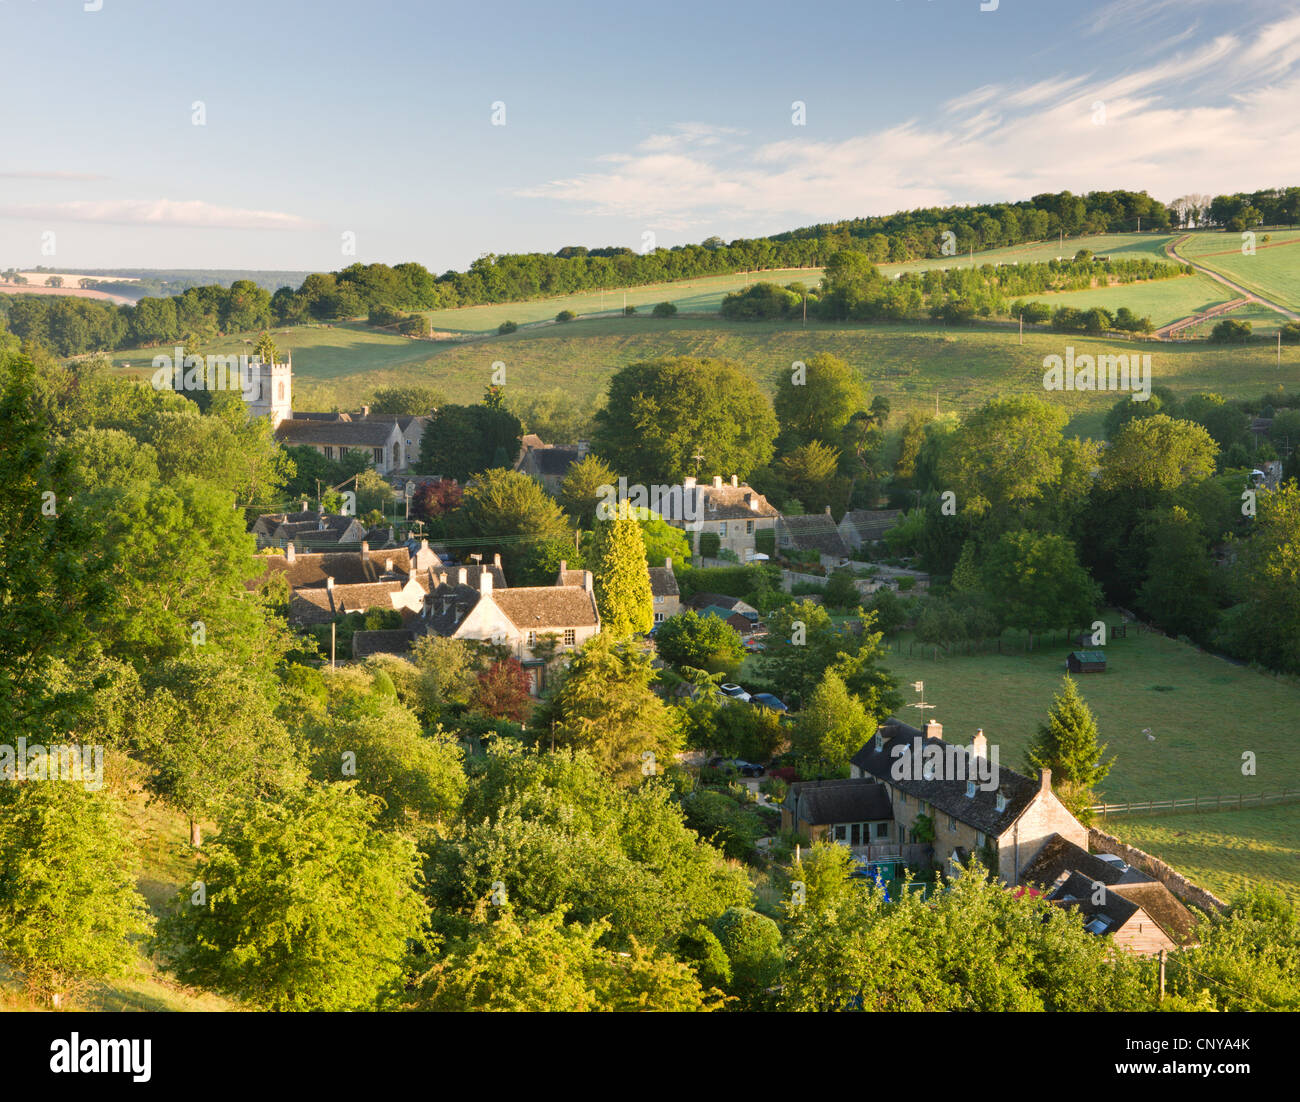 The picturesque village of Naunton in the Cotswolds, Gloucestershire, England. Summer (July) 2010. Stock Photo